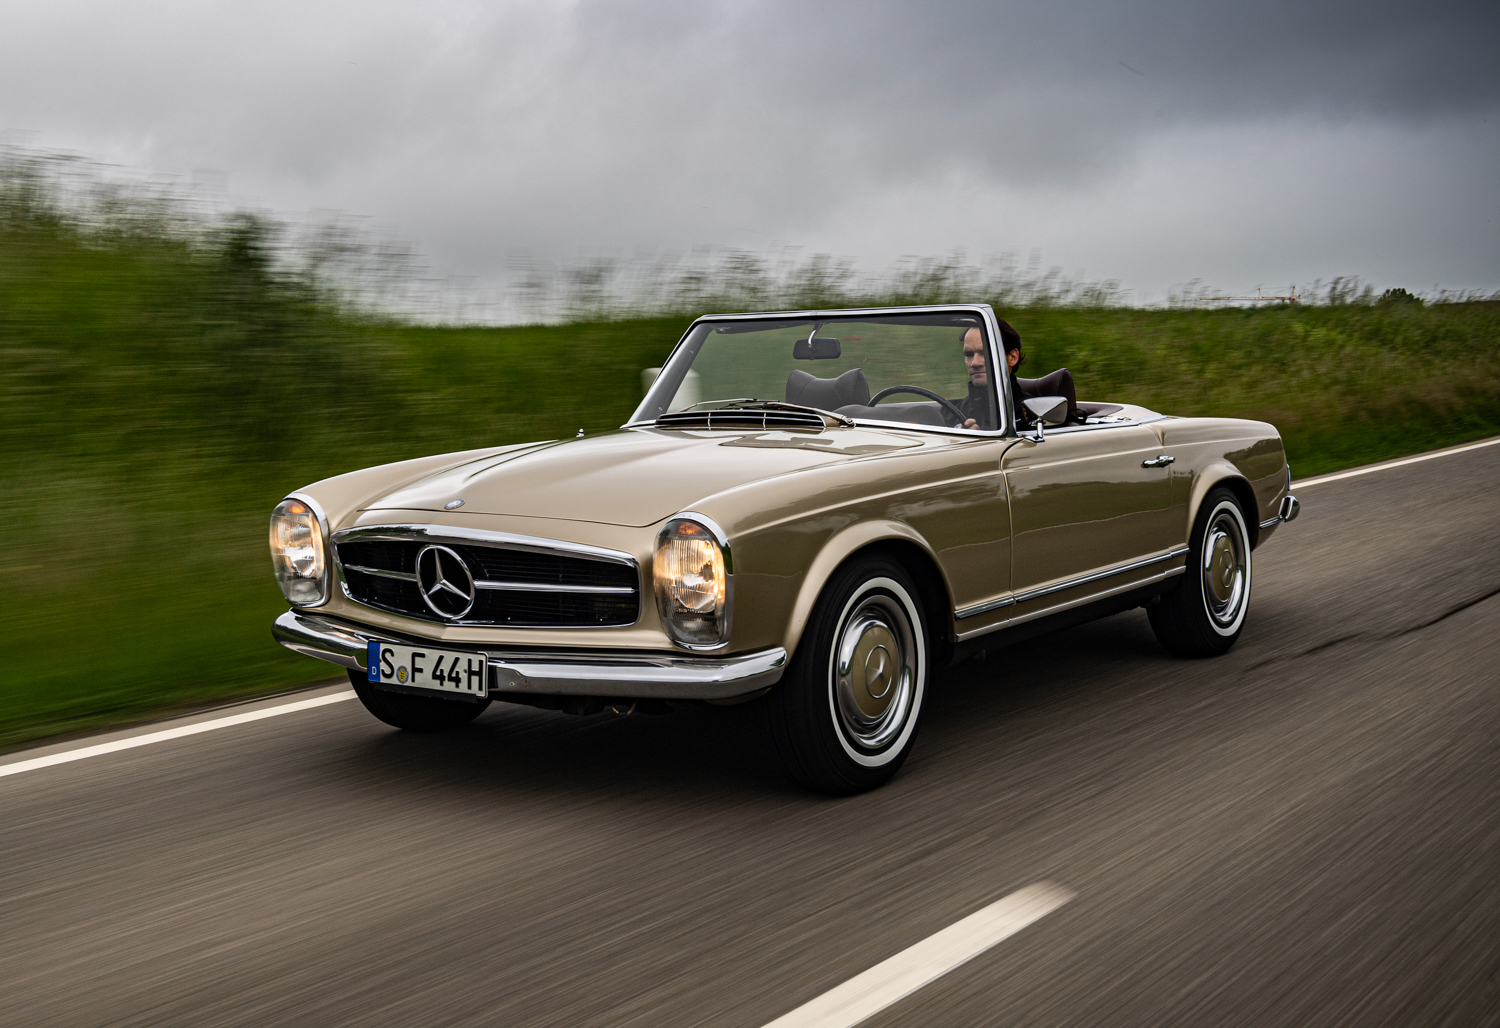 The glamour of the Mercedes-Benz SL at the Pebble Beach Concours d’Elegance Challenge GmbH